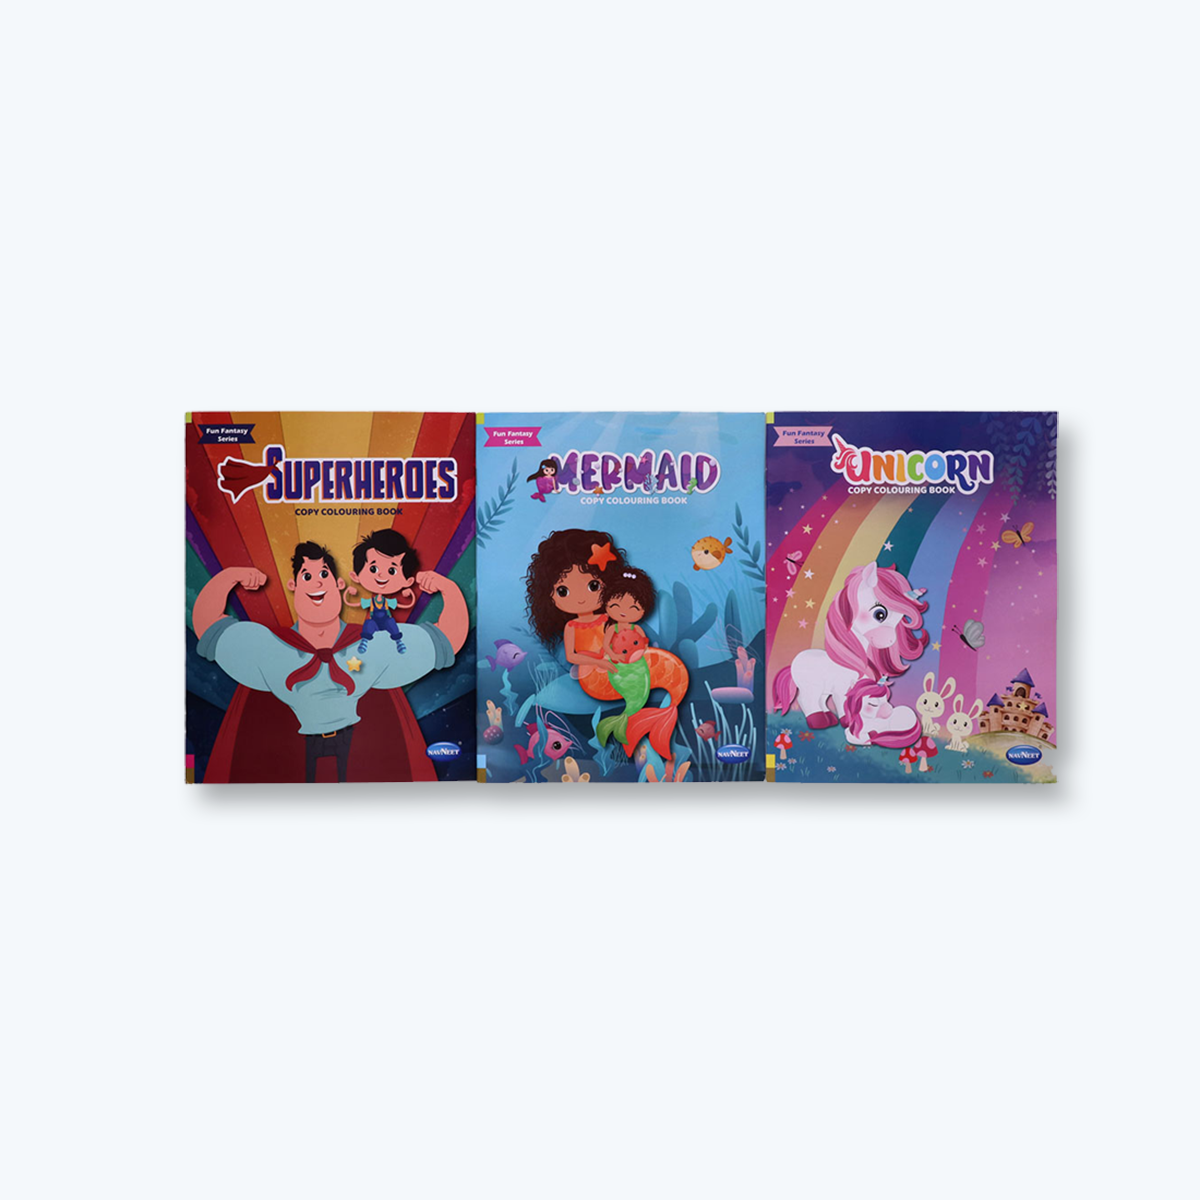 Navneet Fun Fantasy Series Copy Colouring Book - Set of 3 books - Unicorn, Mermaid, Superheroes - Painting and colouring books for kids- Youva Stationery- 40+ pages